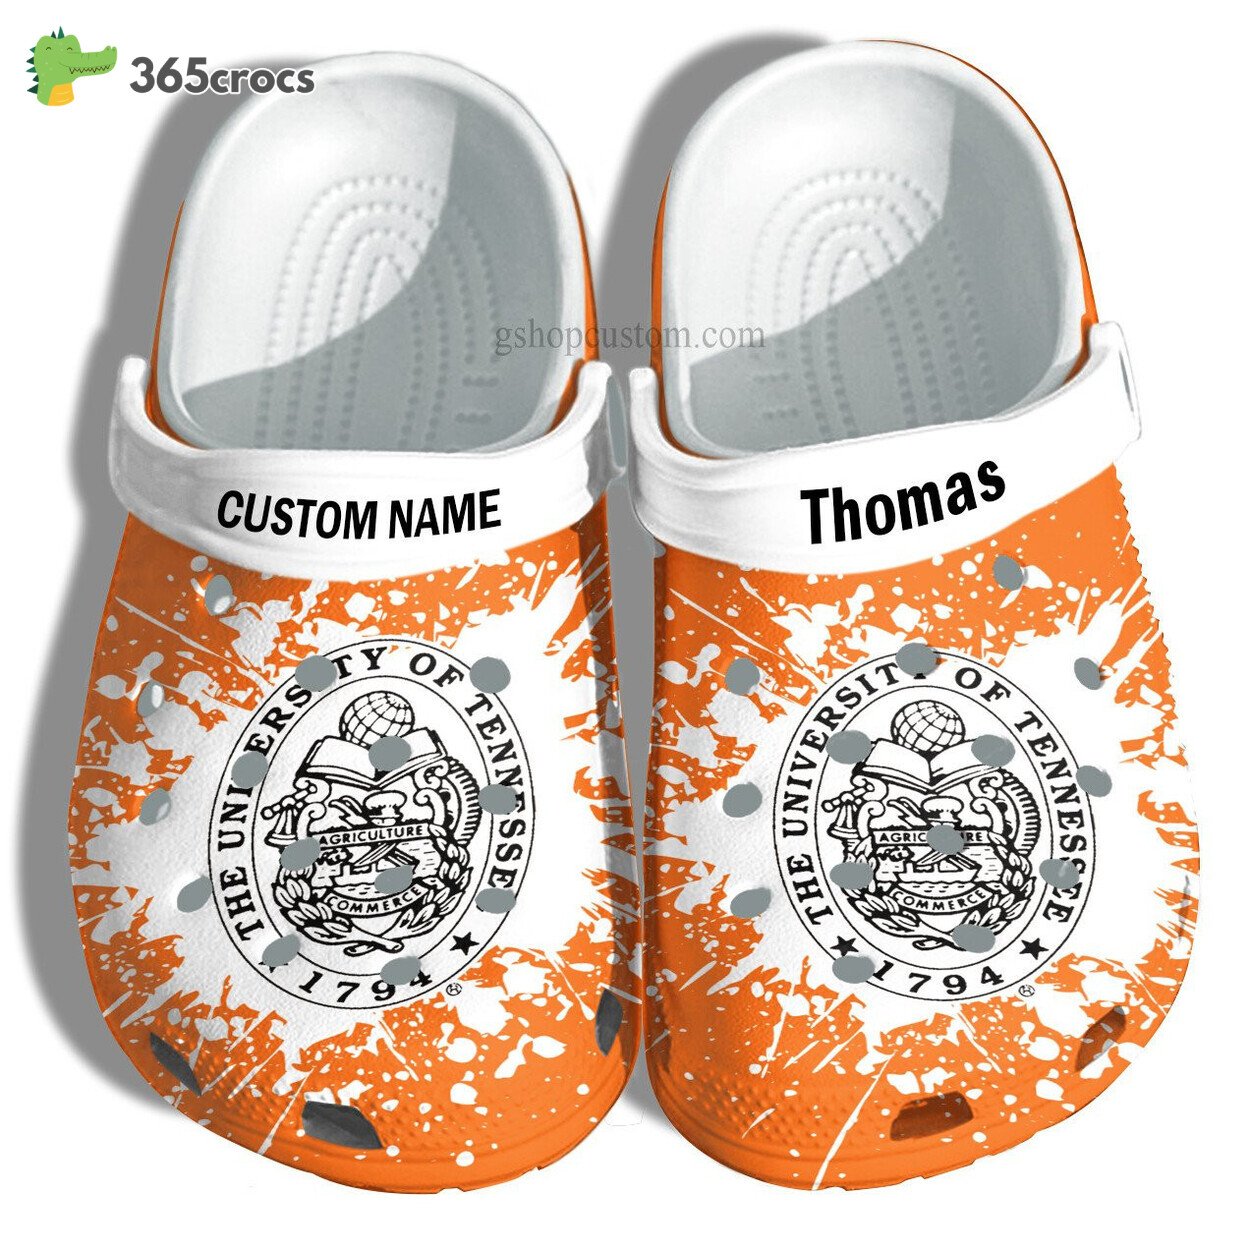 The University Of Tennessee Graduation Gifts Croc Shoes Customize Admission Gift Shoes